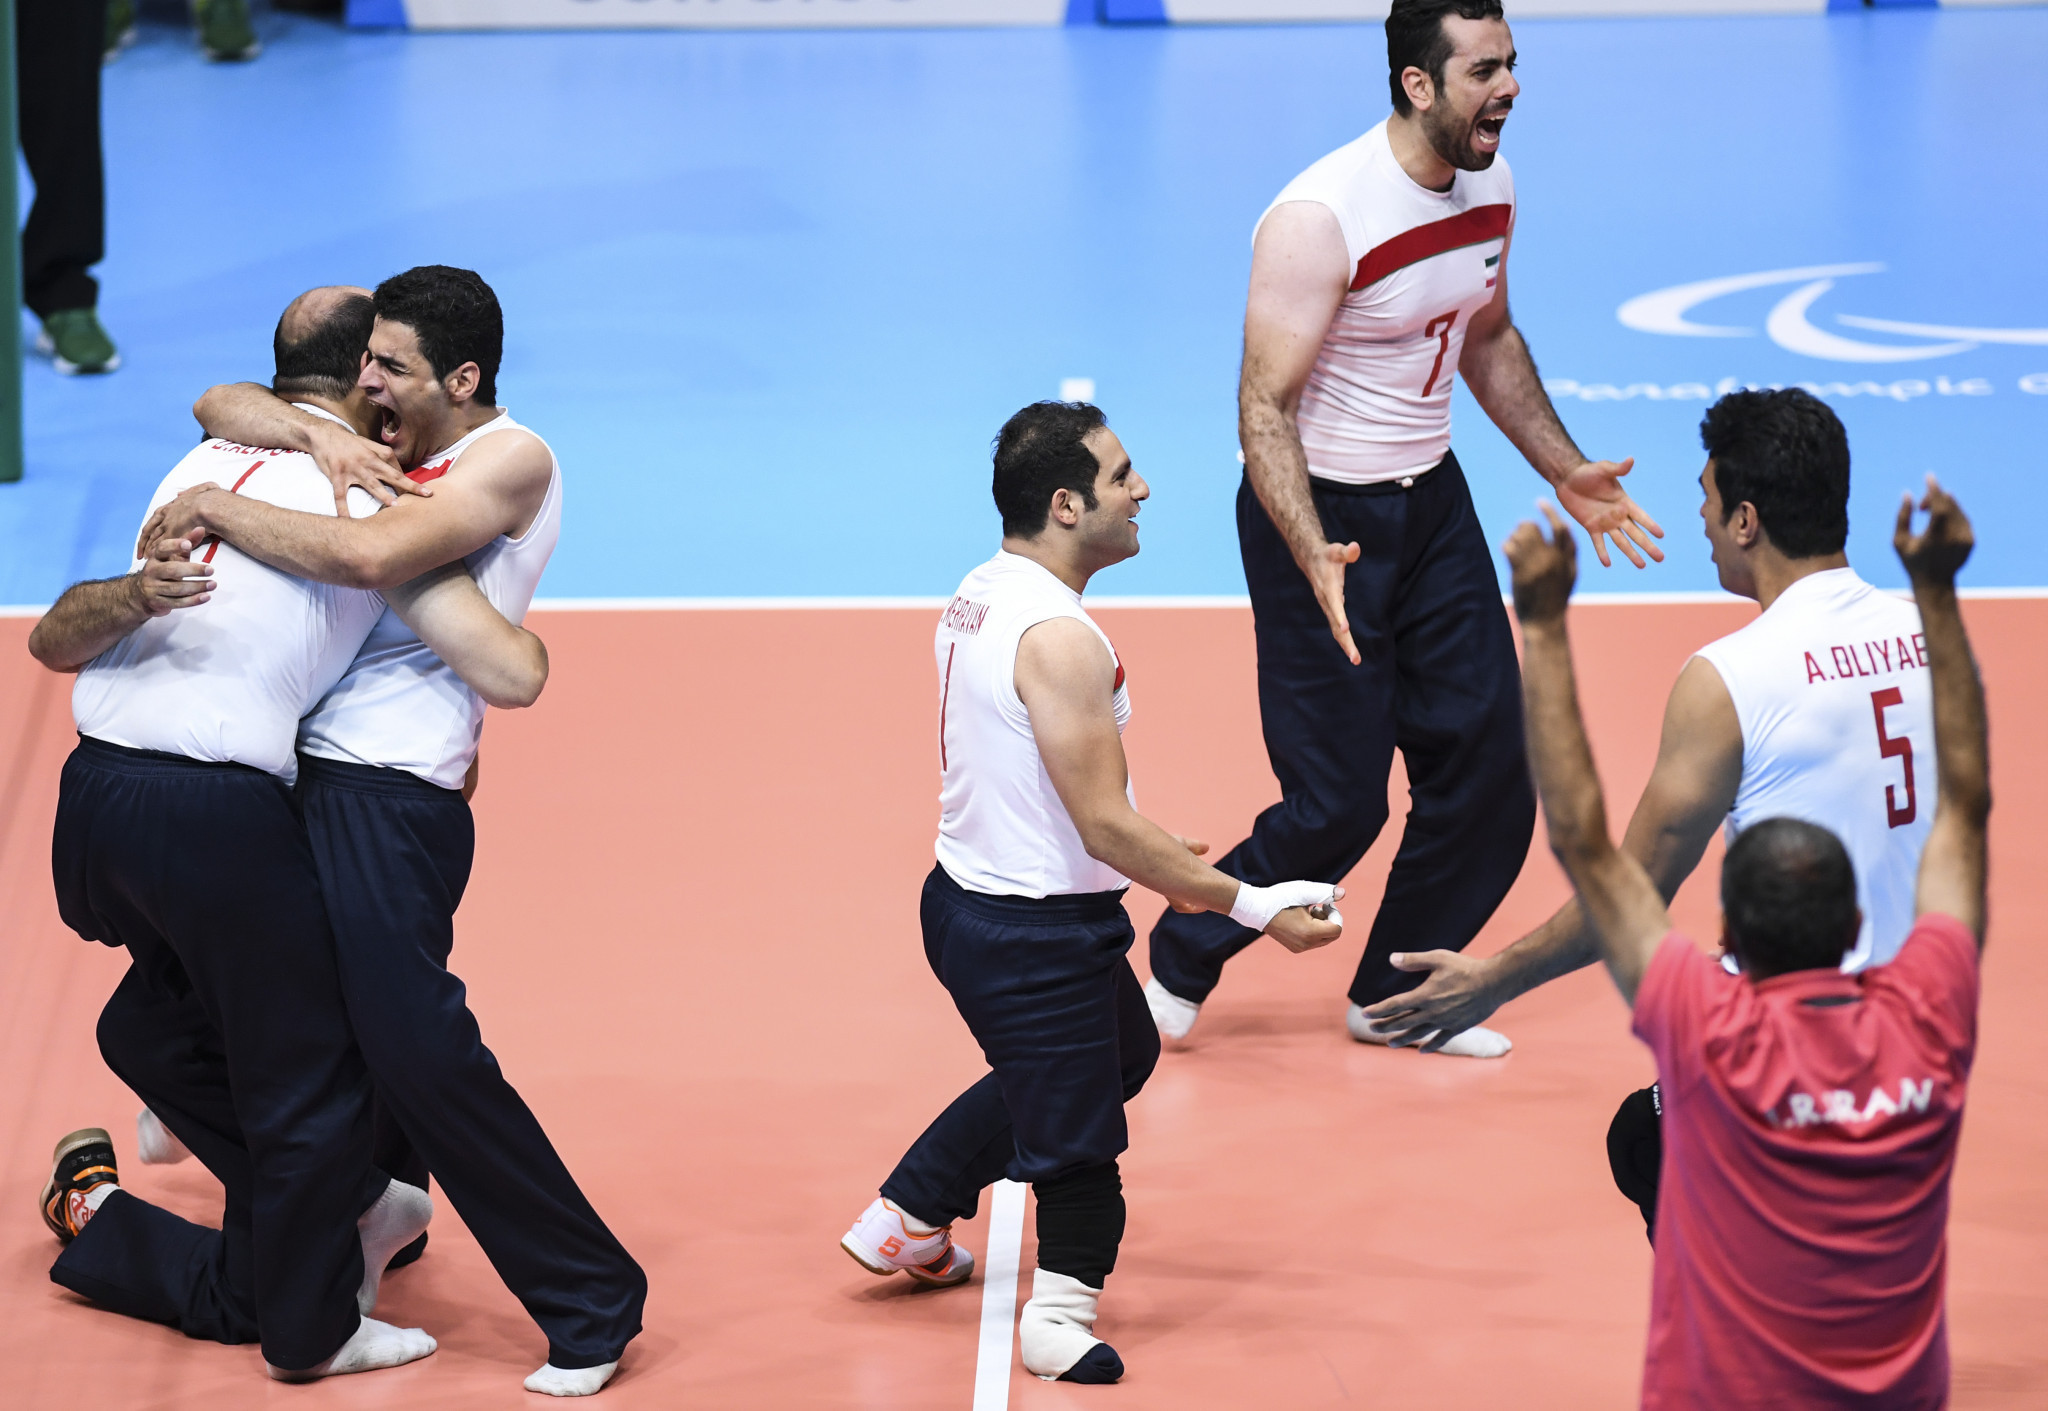 Iran took the men's title in the Sitting Volleyball World Championships earlier this month ©Getty Images